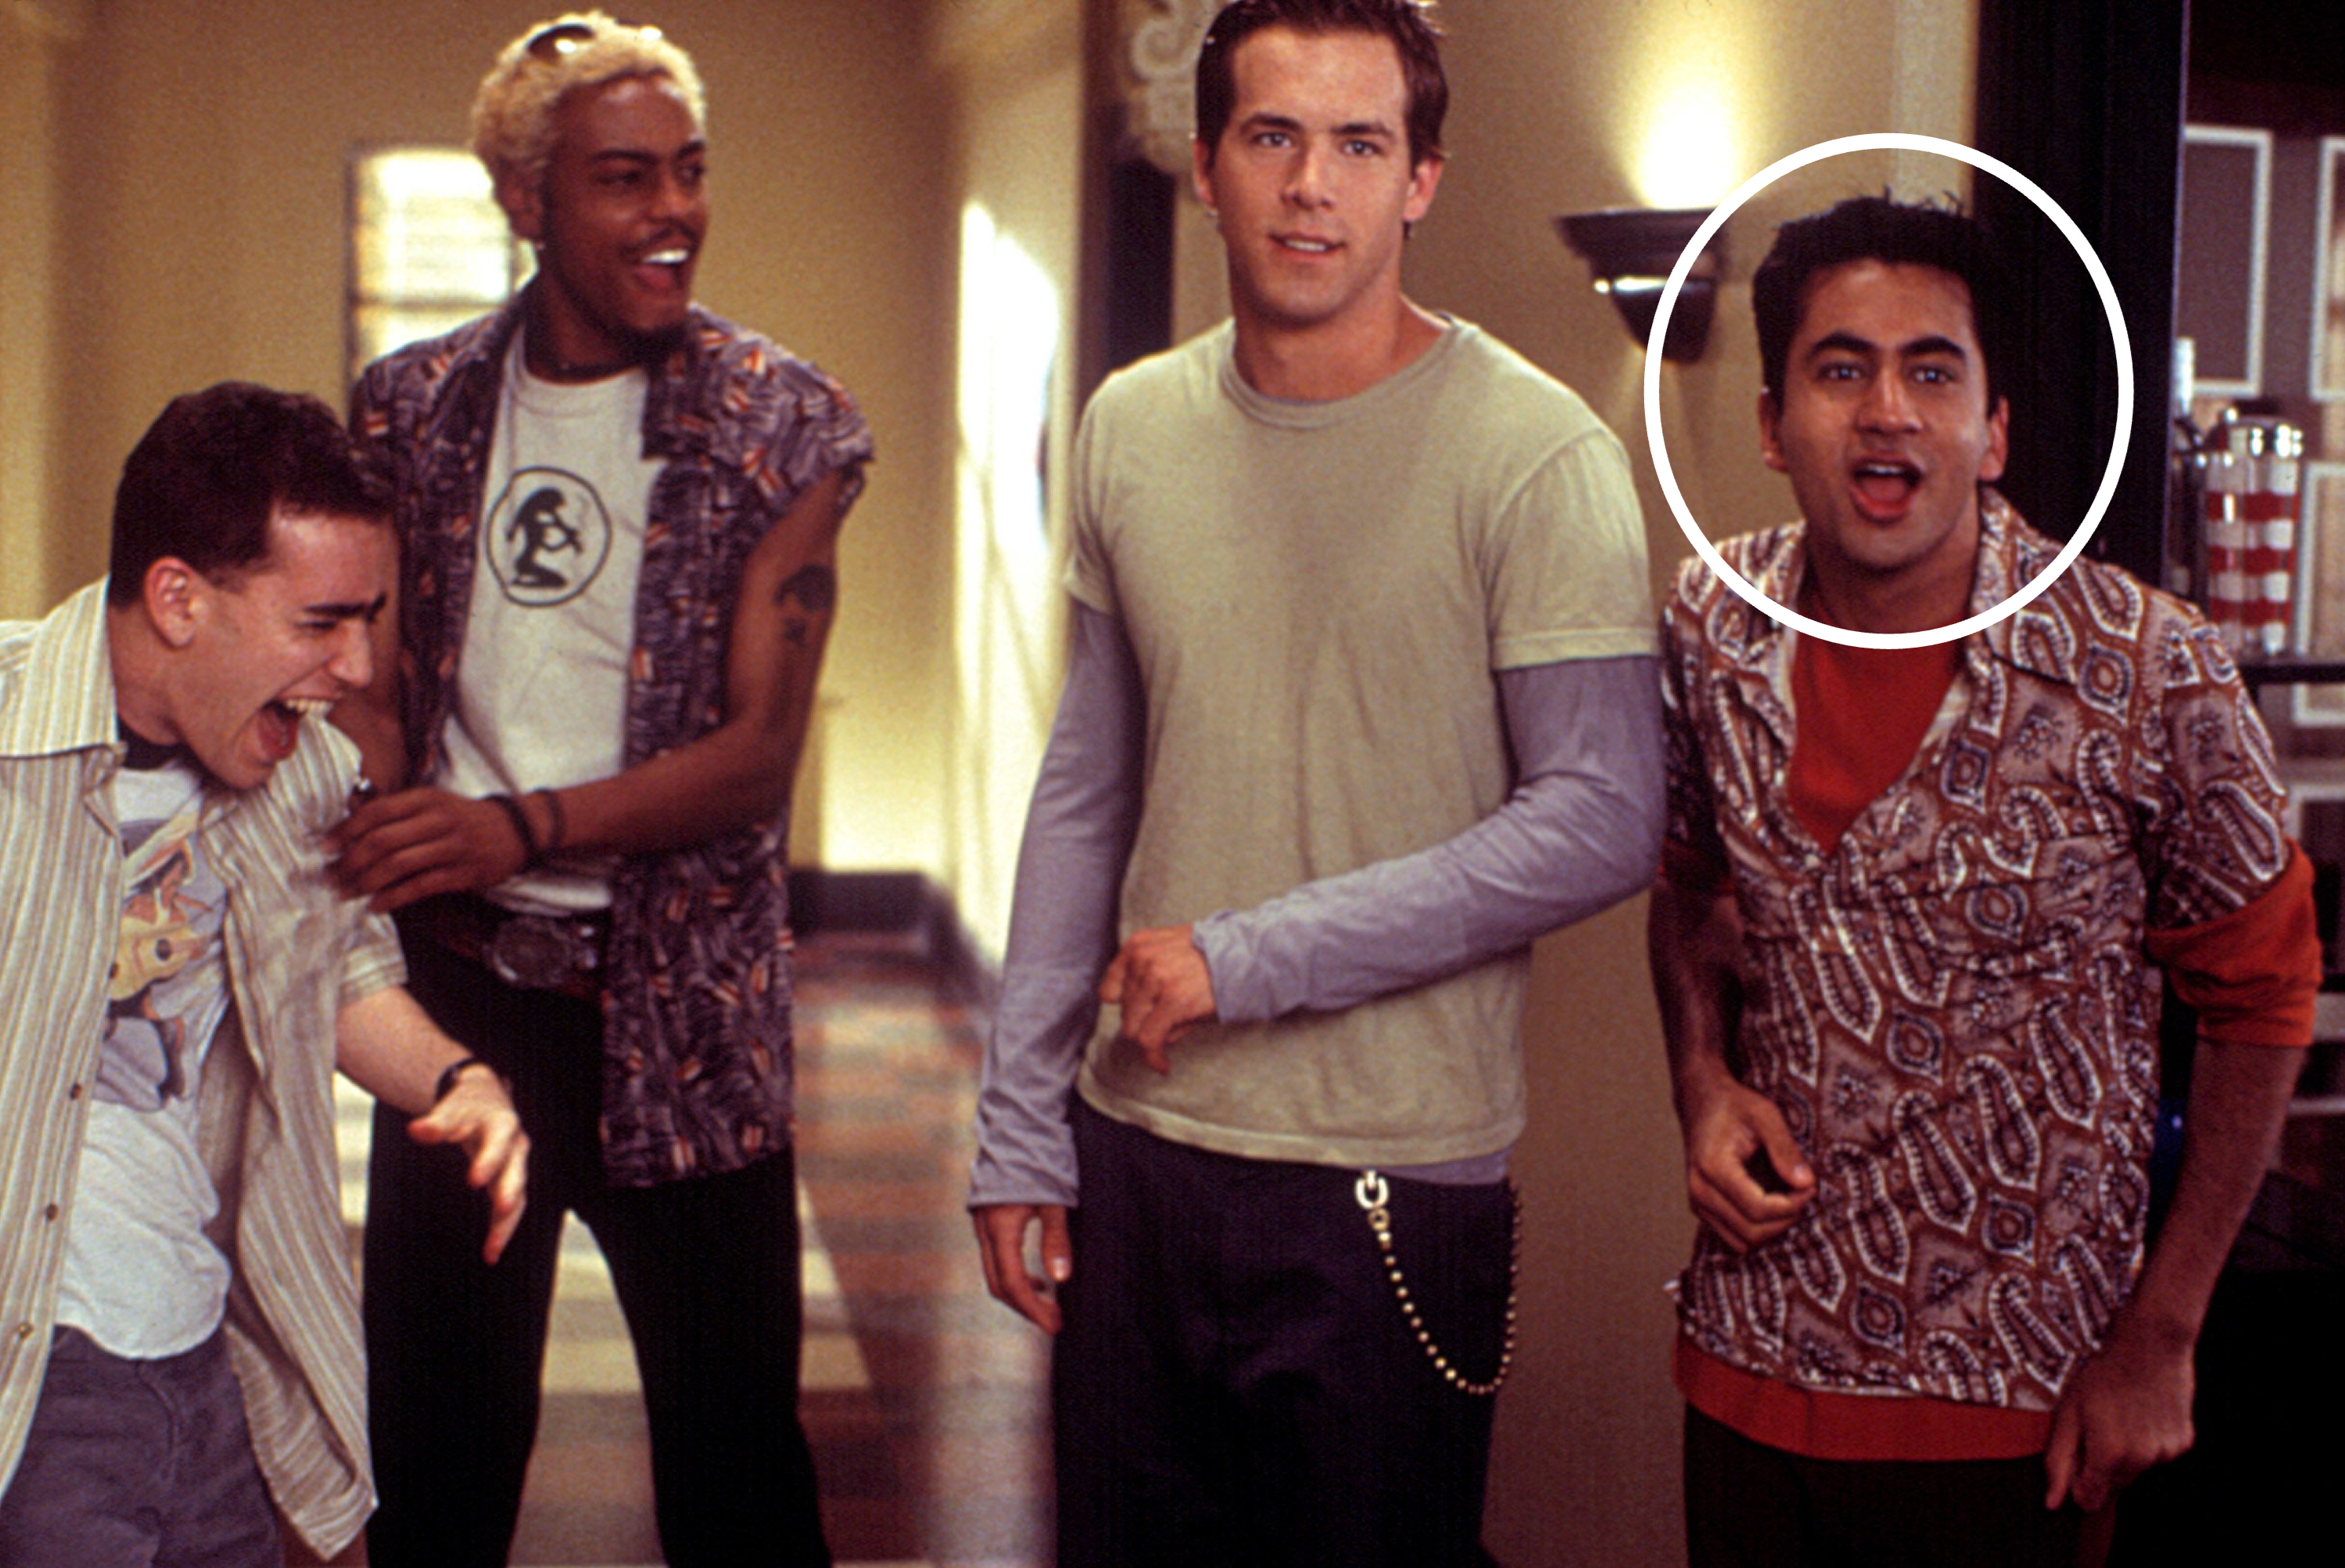 Jason Winter, Teck Holmes, Ryan Reynolds and Kal Penn in casual attire standing together